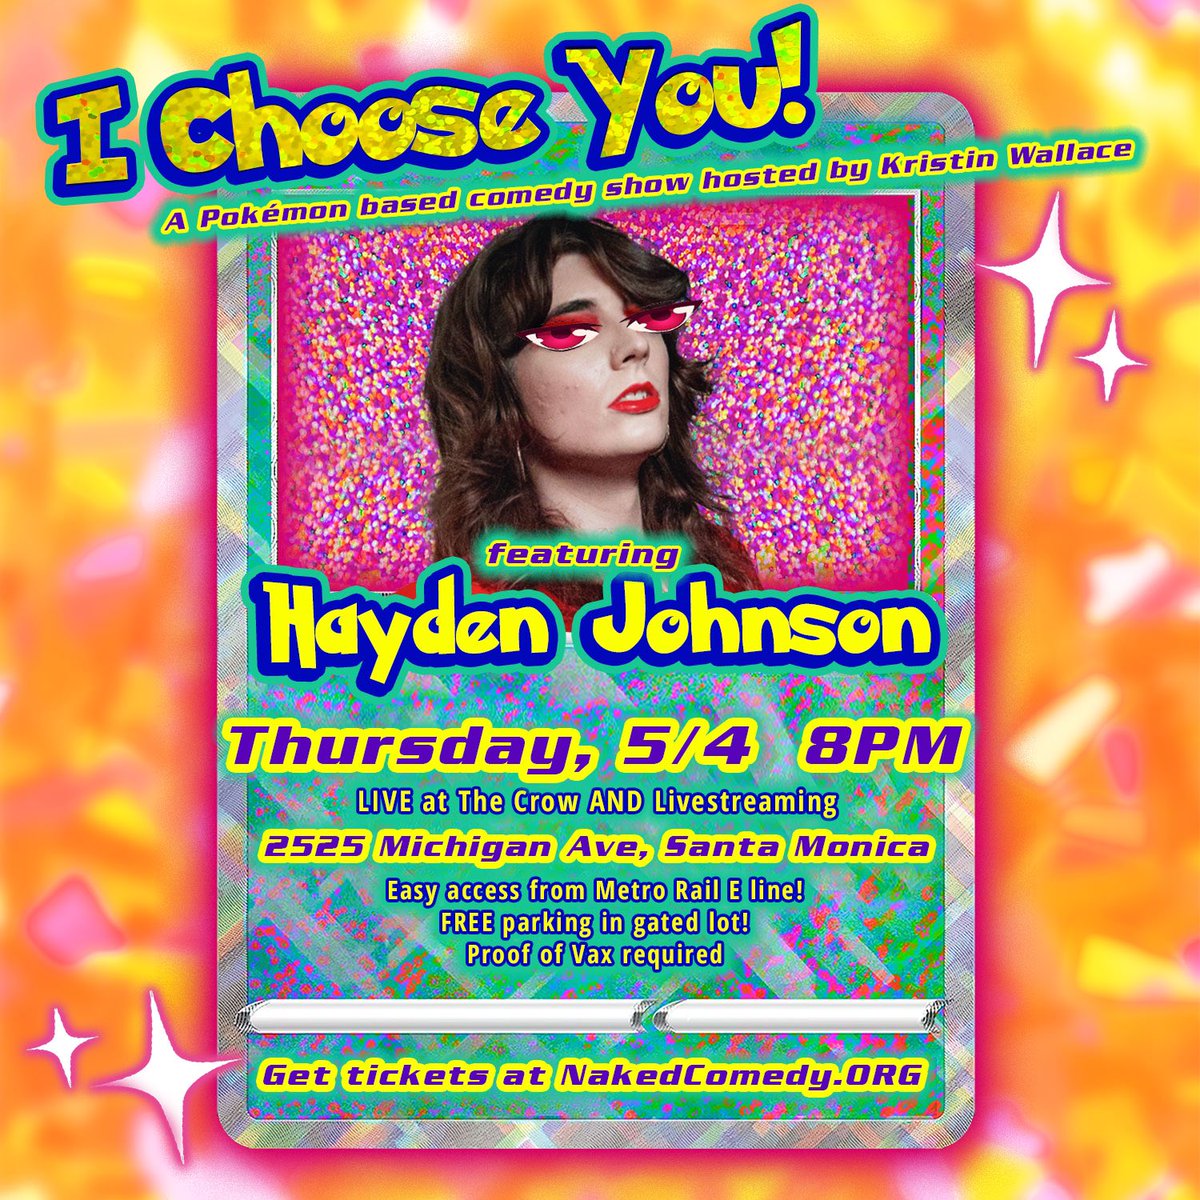 🎶 CAUSE GIRLS IS POKÉHEADS TOO 🎶 (Duh this show is being hosted and produced by 2 gals) We're turning up the heat on this already phenomenal show by adding @hayden_johnson_!! Your ONLY chance to find out her favorite #Pokémon is NEXT THURS 5/4!! eventbrite.com/e/ncp-the-crow…